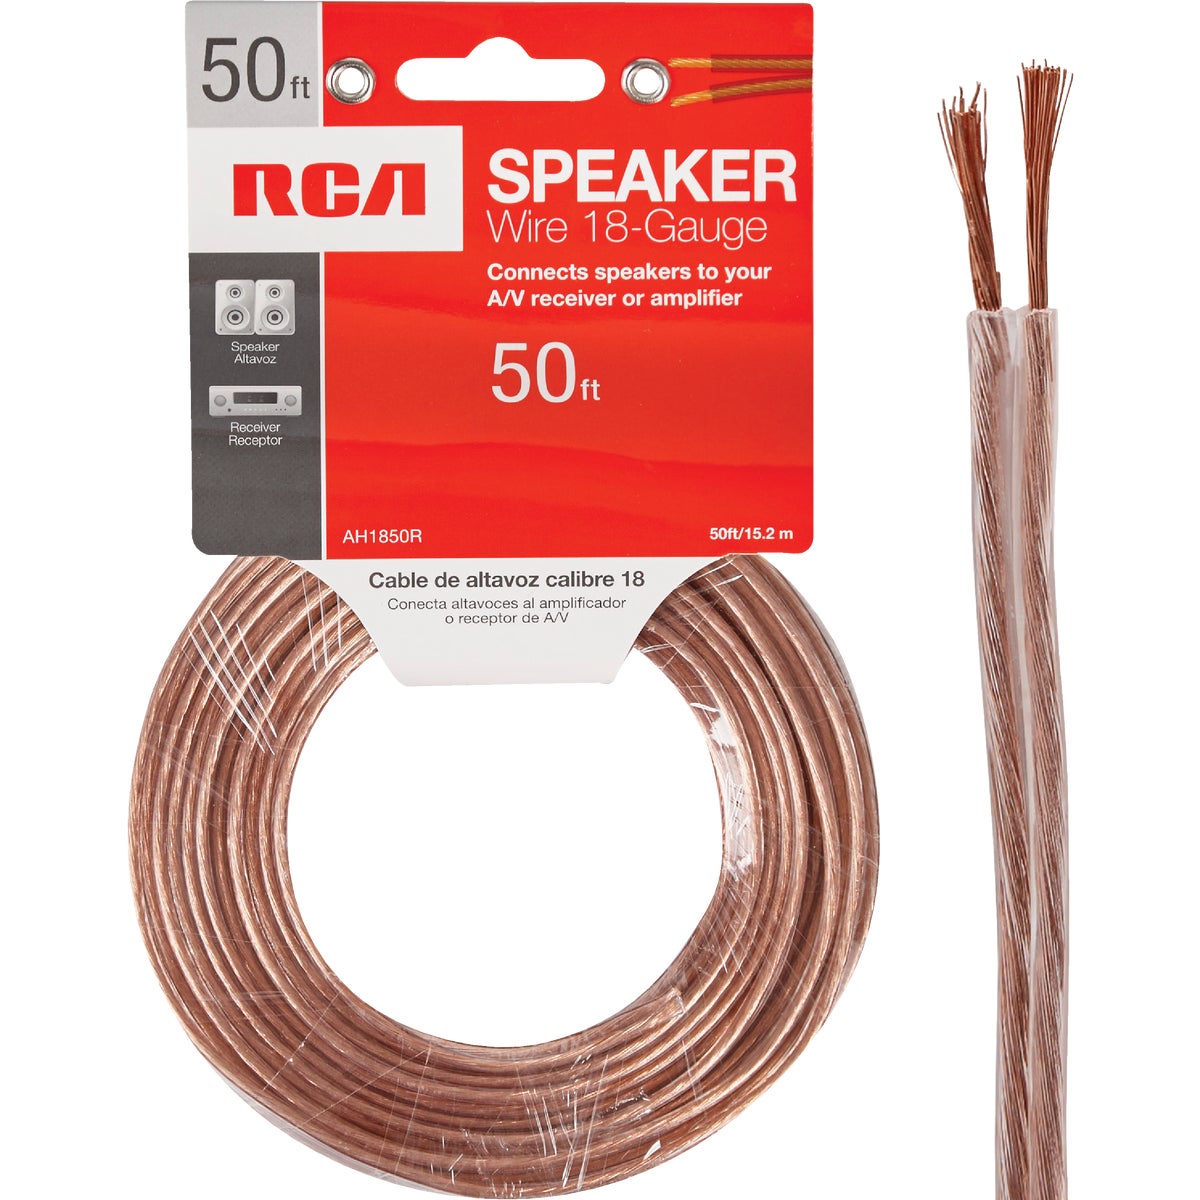 Item 561207, 18-gauge speaker wire ideal for connecting speakers to amplifiers or 